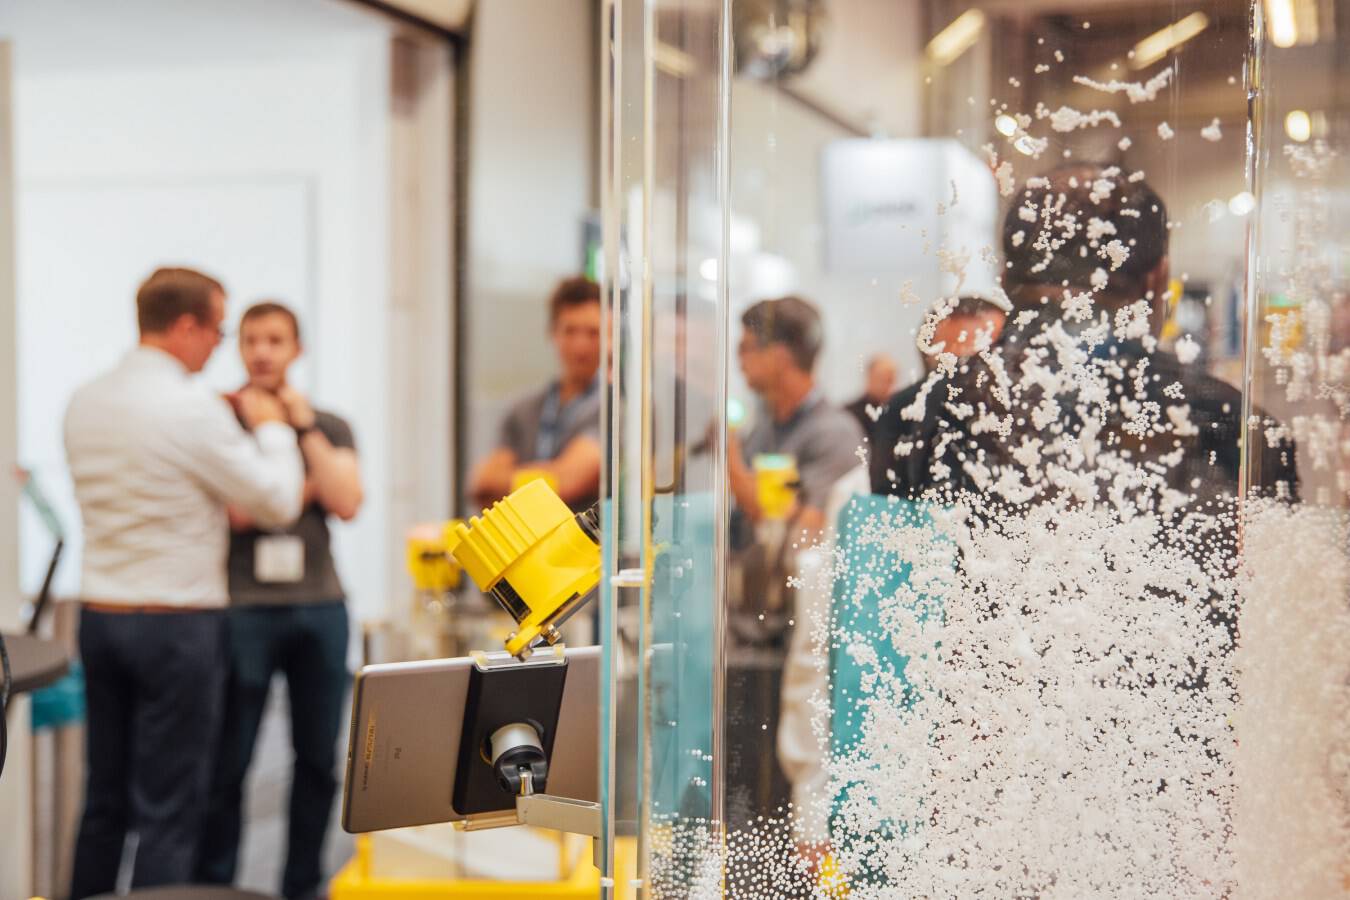 Trade fairs convince with strong supporting programme On 29 and 30 March 2023, the new trade fair year will also begin in Dortmund for the world of bulk solids, processes and recycling. 